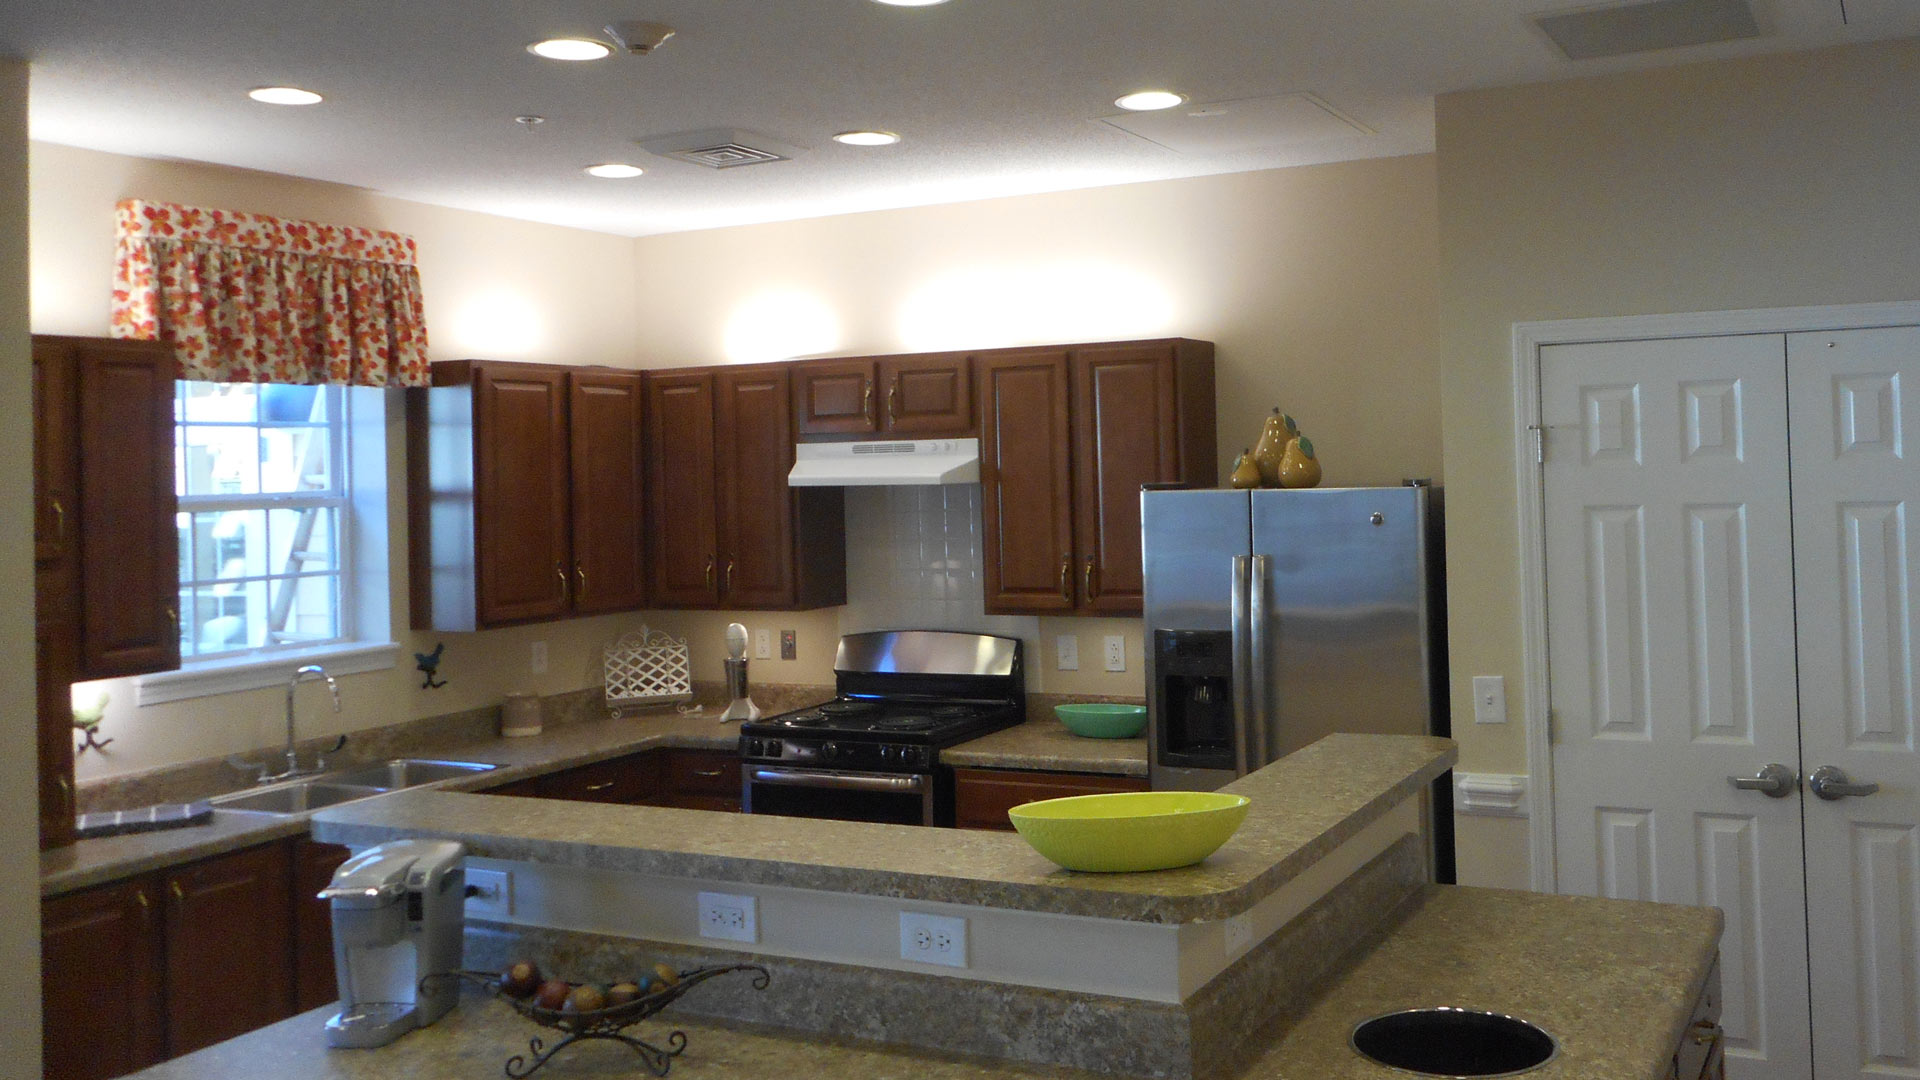 Carillon Assisted Living of Huntersville - Kitchen